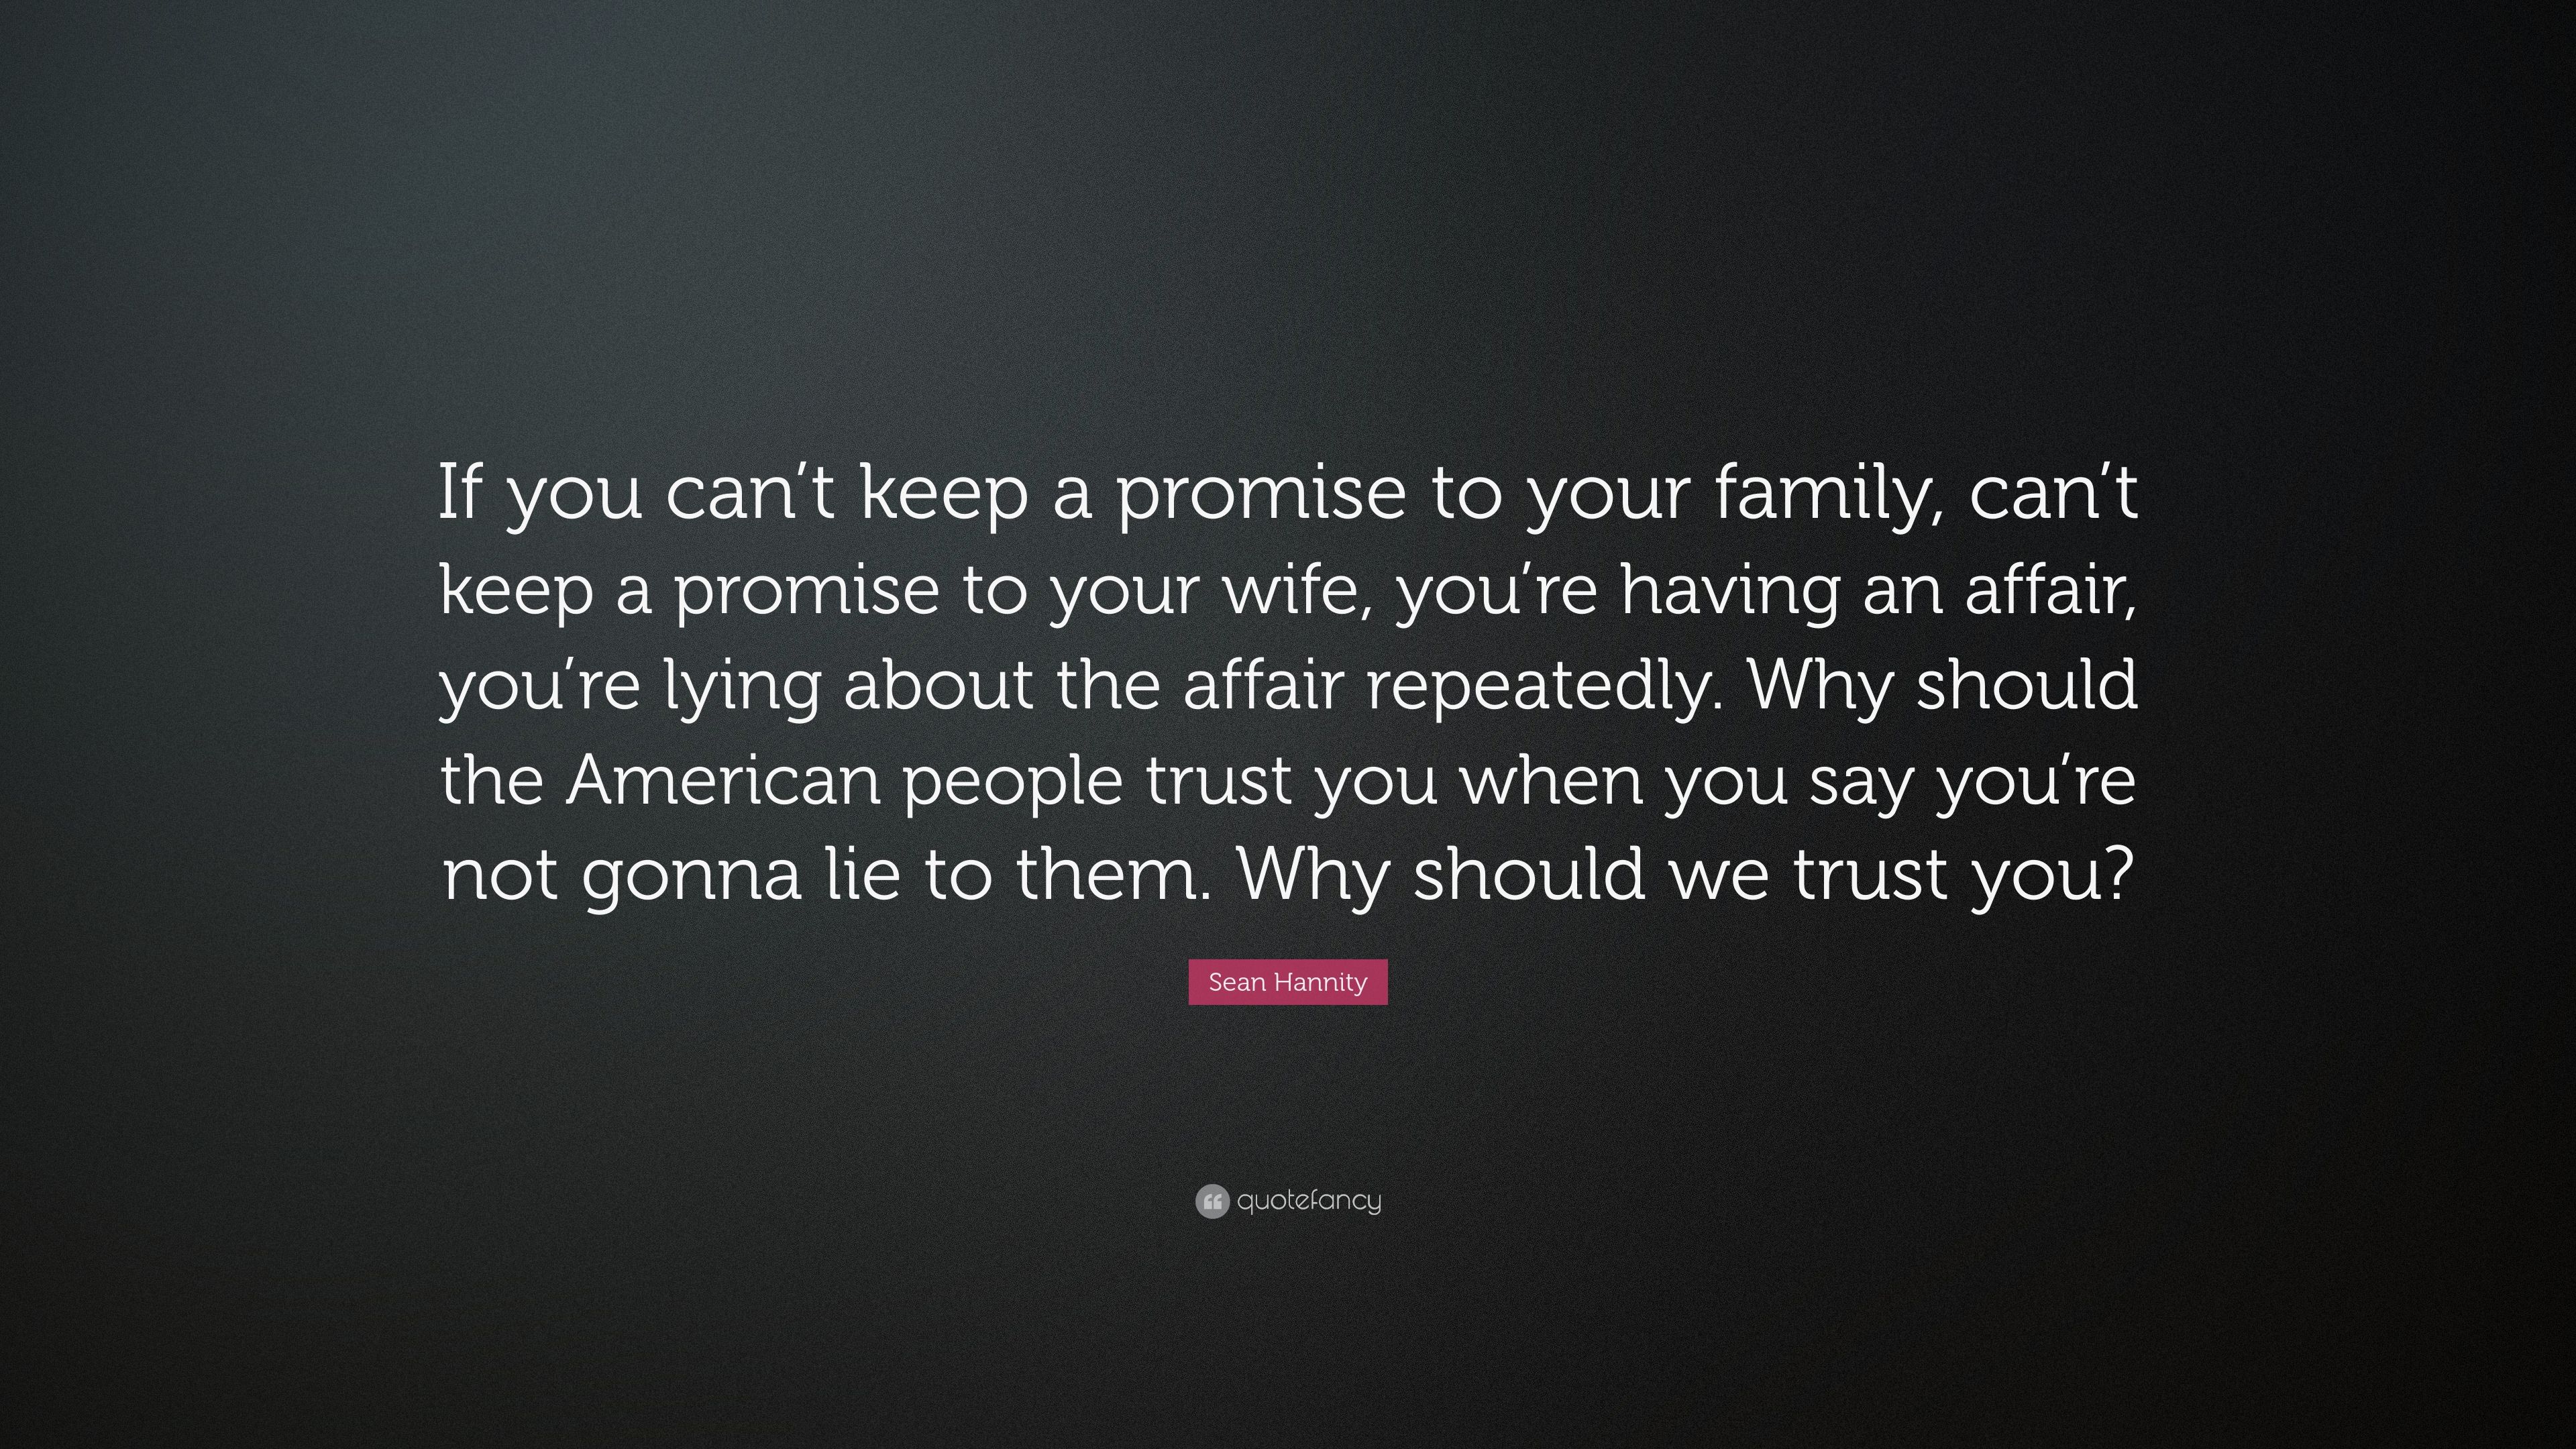 Sean Hannity Quote: “If you can't keep a promise to your family